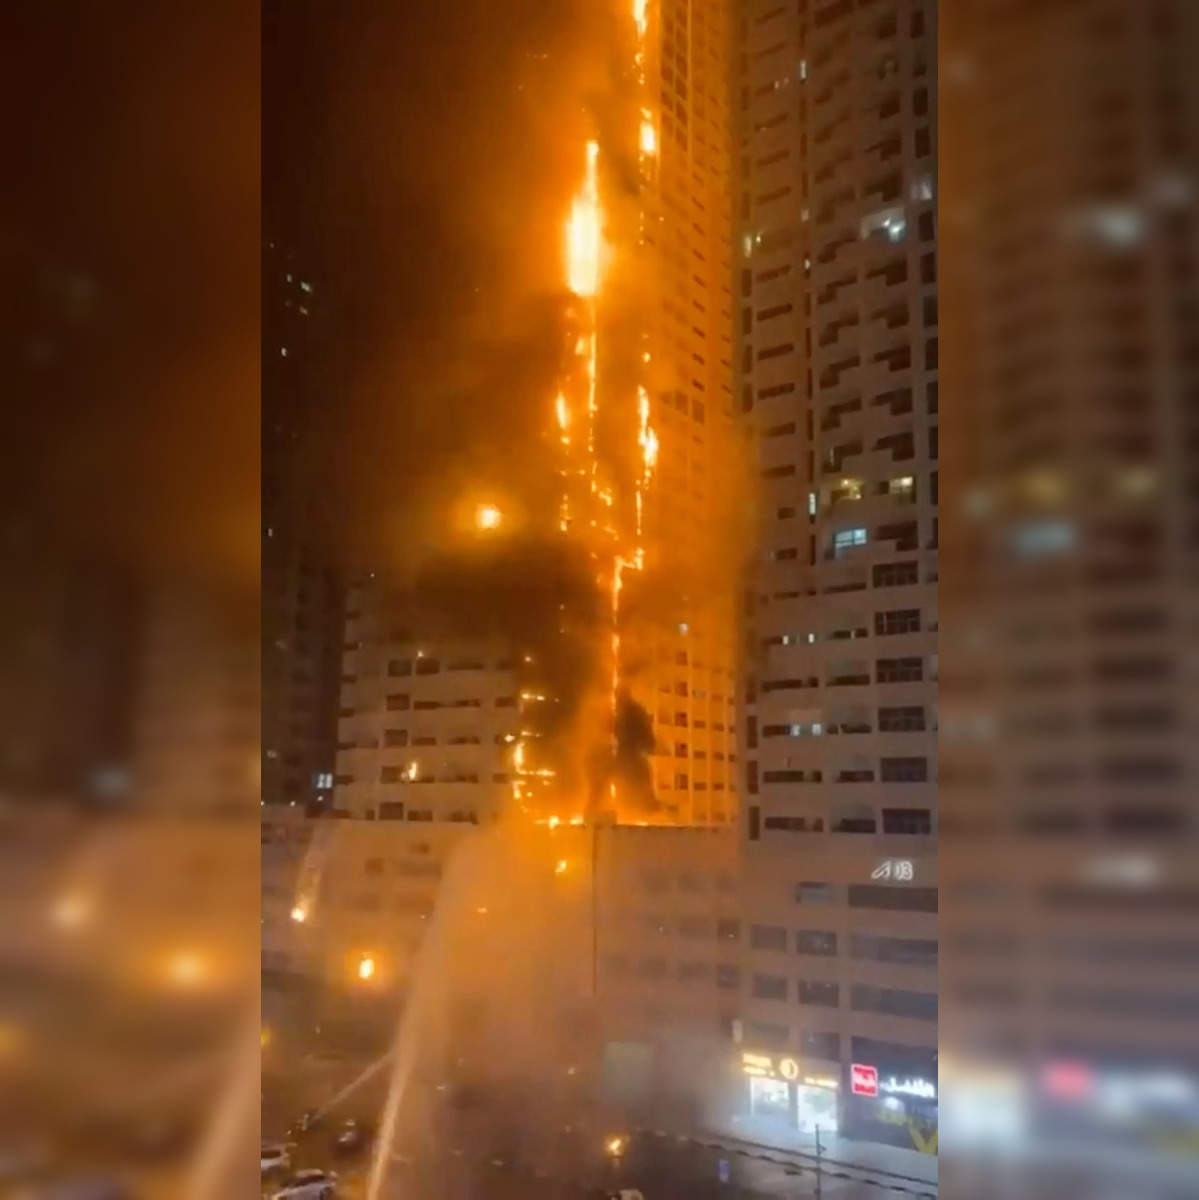 Huge fire engulfs high-rise apartment building in UAE, World News